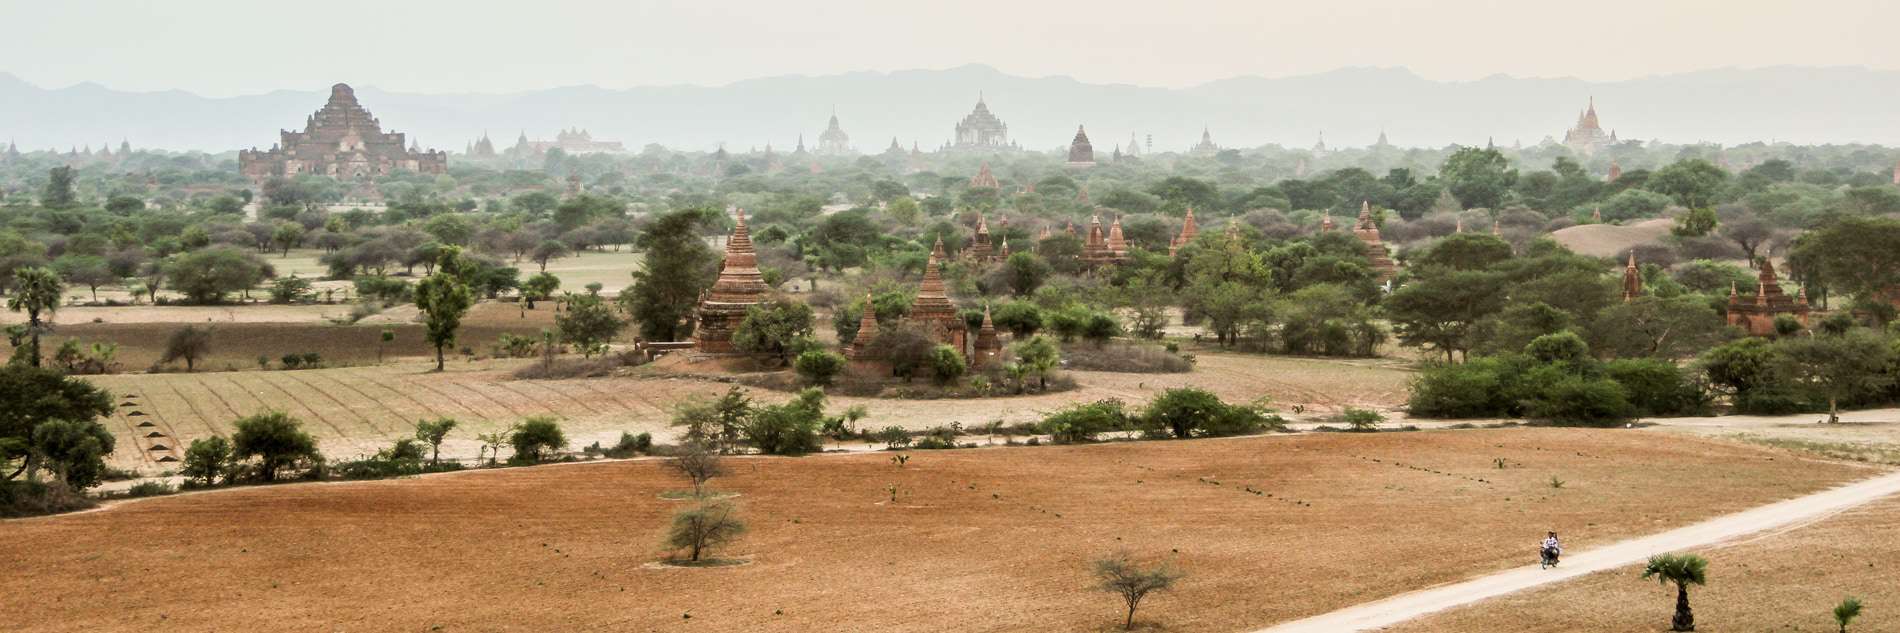 A sparse tree filled, arid field with dozens of orange brick temple pagodas.